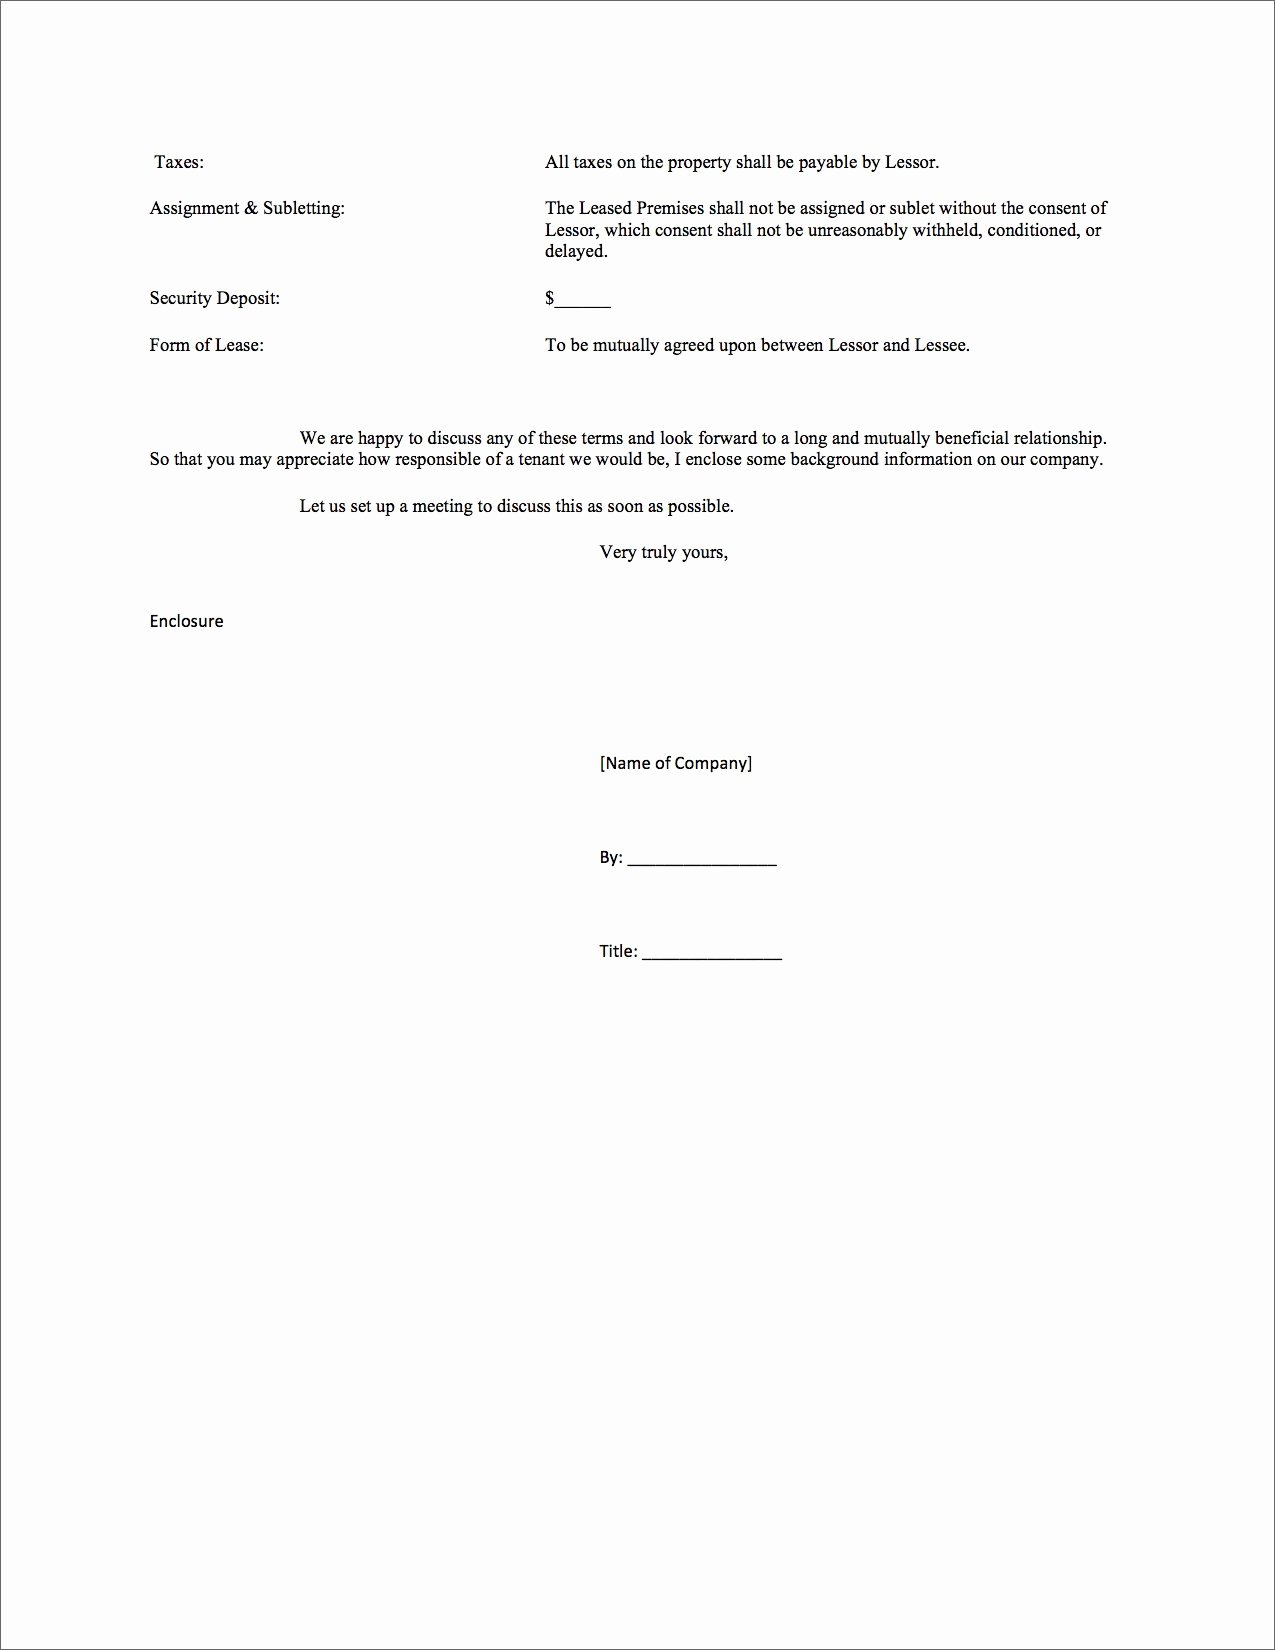 Sample Letter Of Intent to Lease Unique How to Negotiate the Best Fice Lease for Your Startup